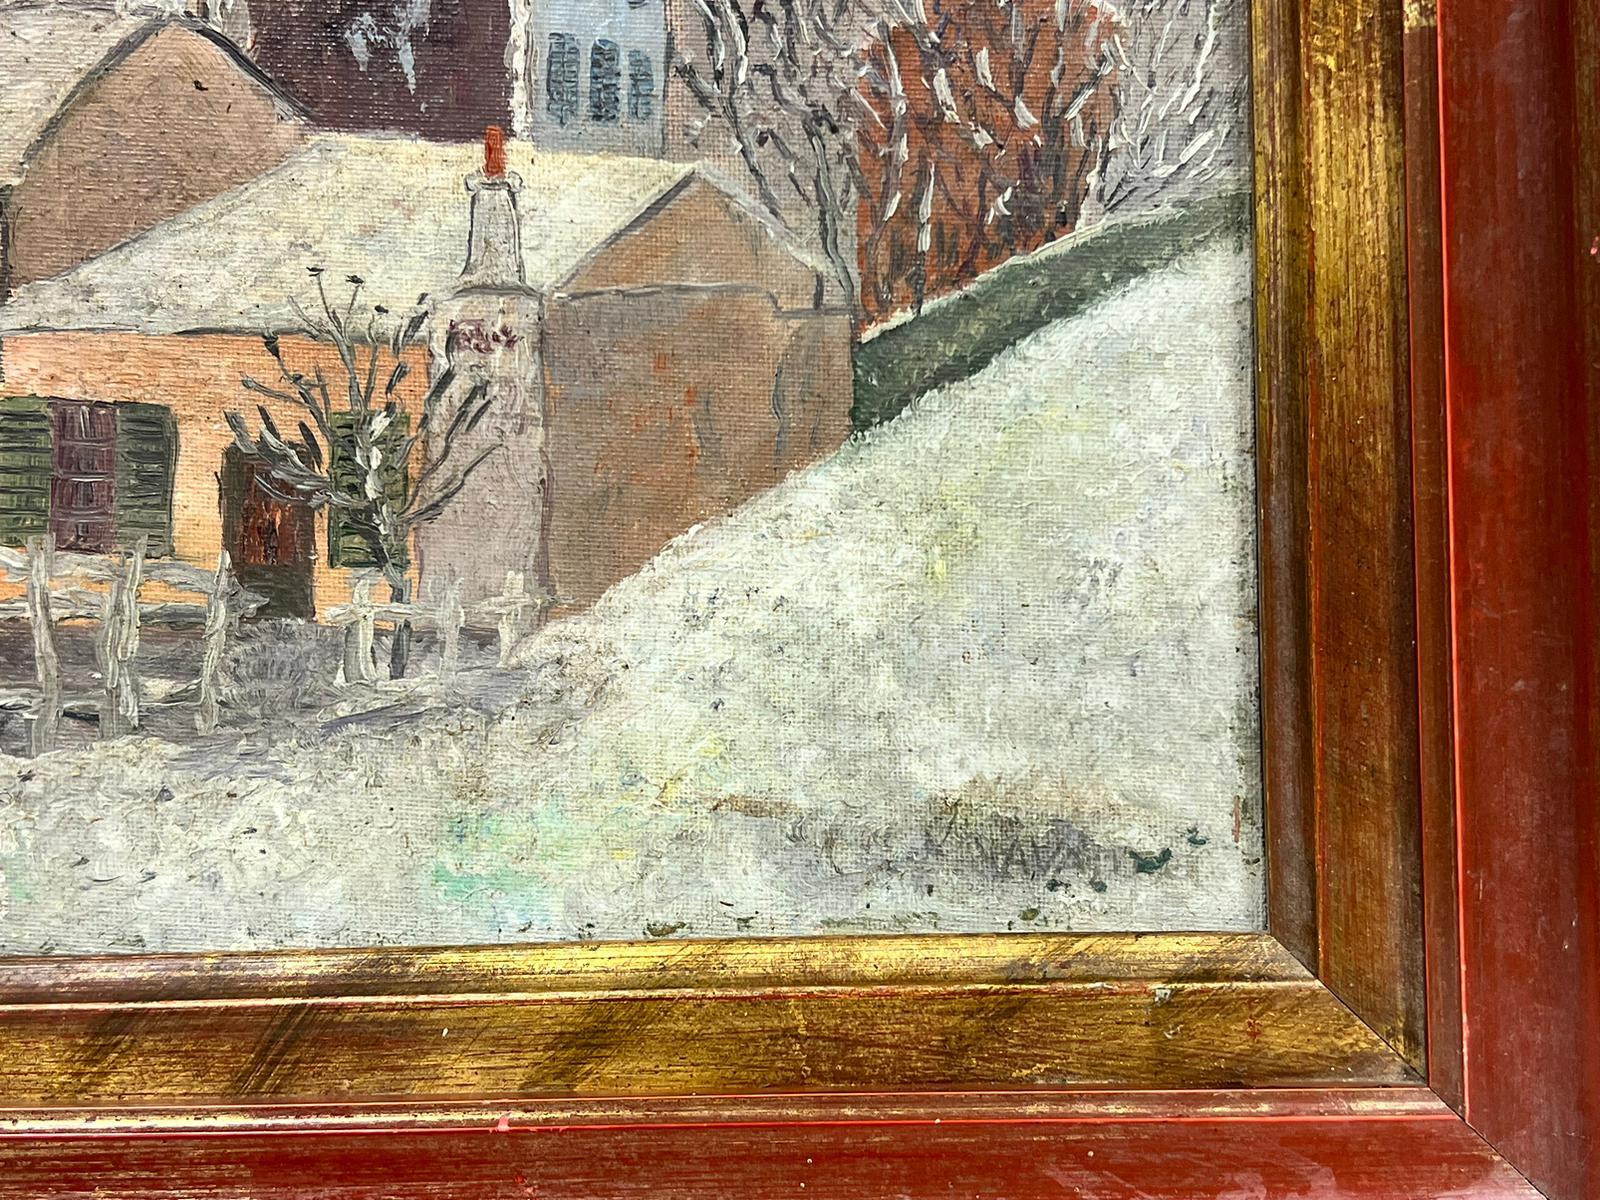 Montmartre
French school, 20th century 
Signed lower corner 
oil on board, framed
framed: 12 x 14 inches
board: 8 x 10 inches
private collection, France
the painting is in overall very good and sound condition